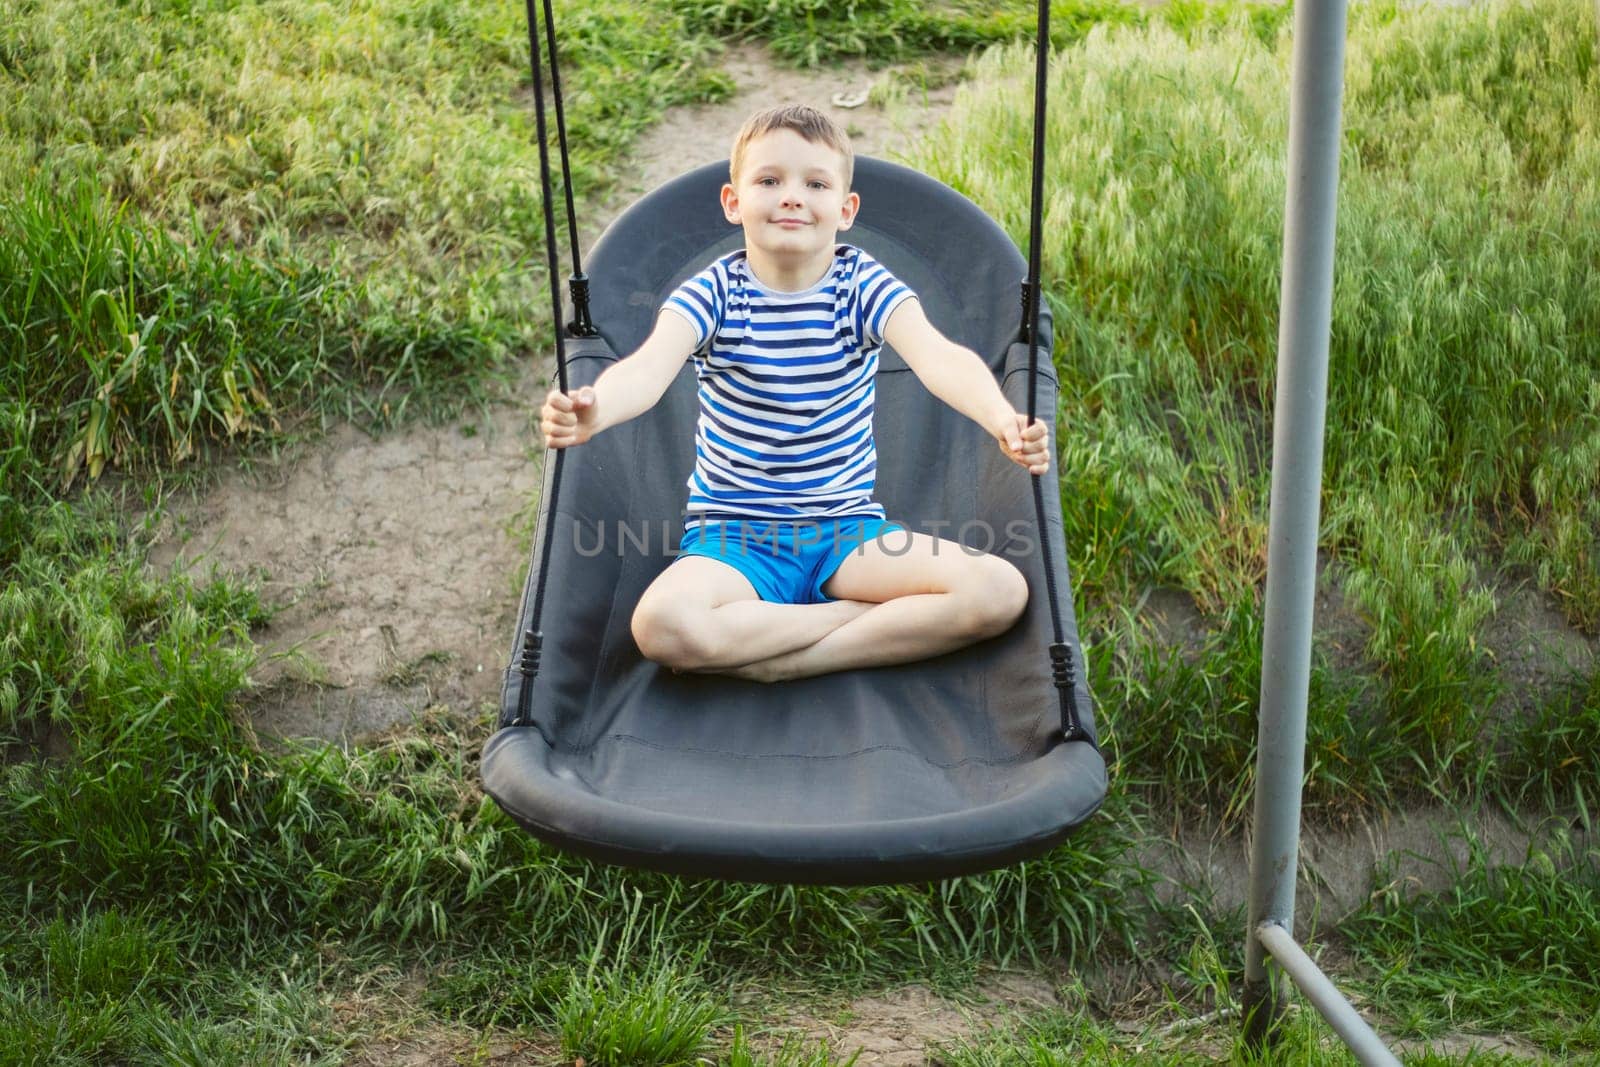 Young boy sitting on swing outdoors in summer. Leisure, childhood concept. Lifestyle portrait, natural, candid design for family, leisure banner.